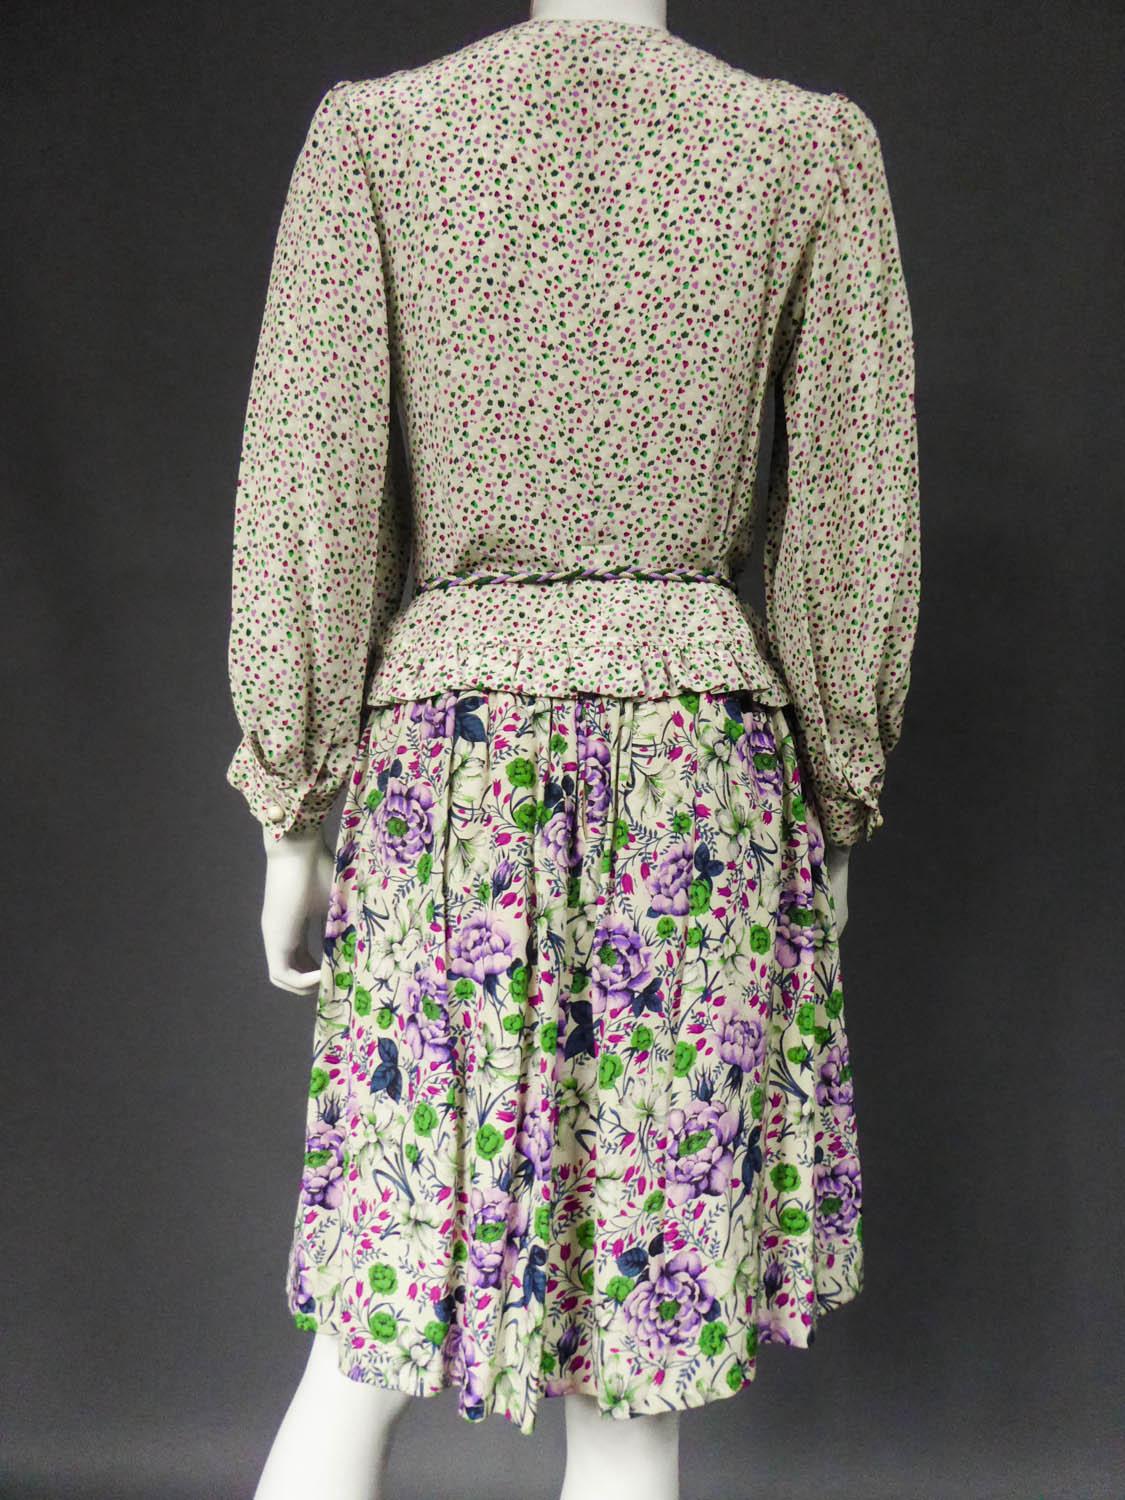  A French Ungaro Parallele Skirt Blouse and Belt Set - Circa 1978 / 1980 For Sale 8